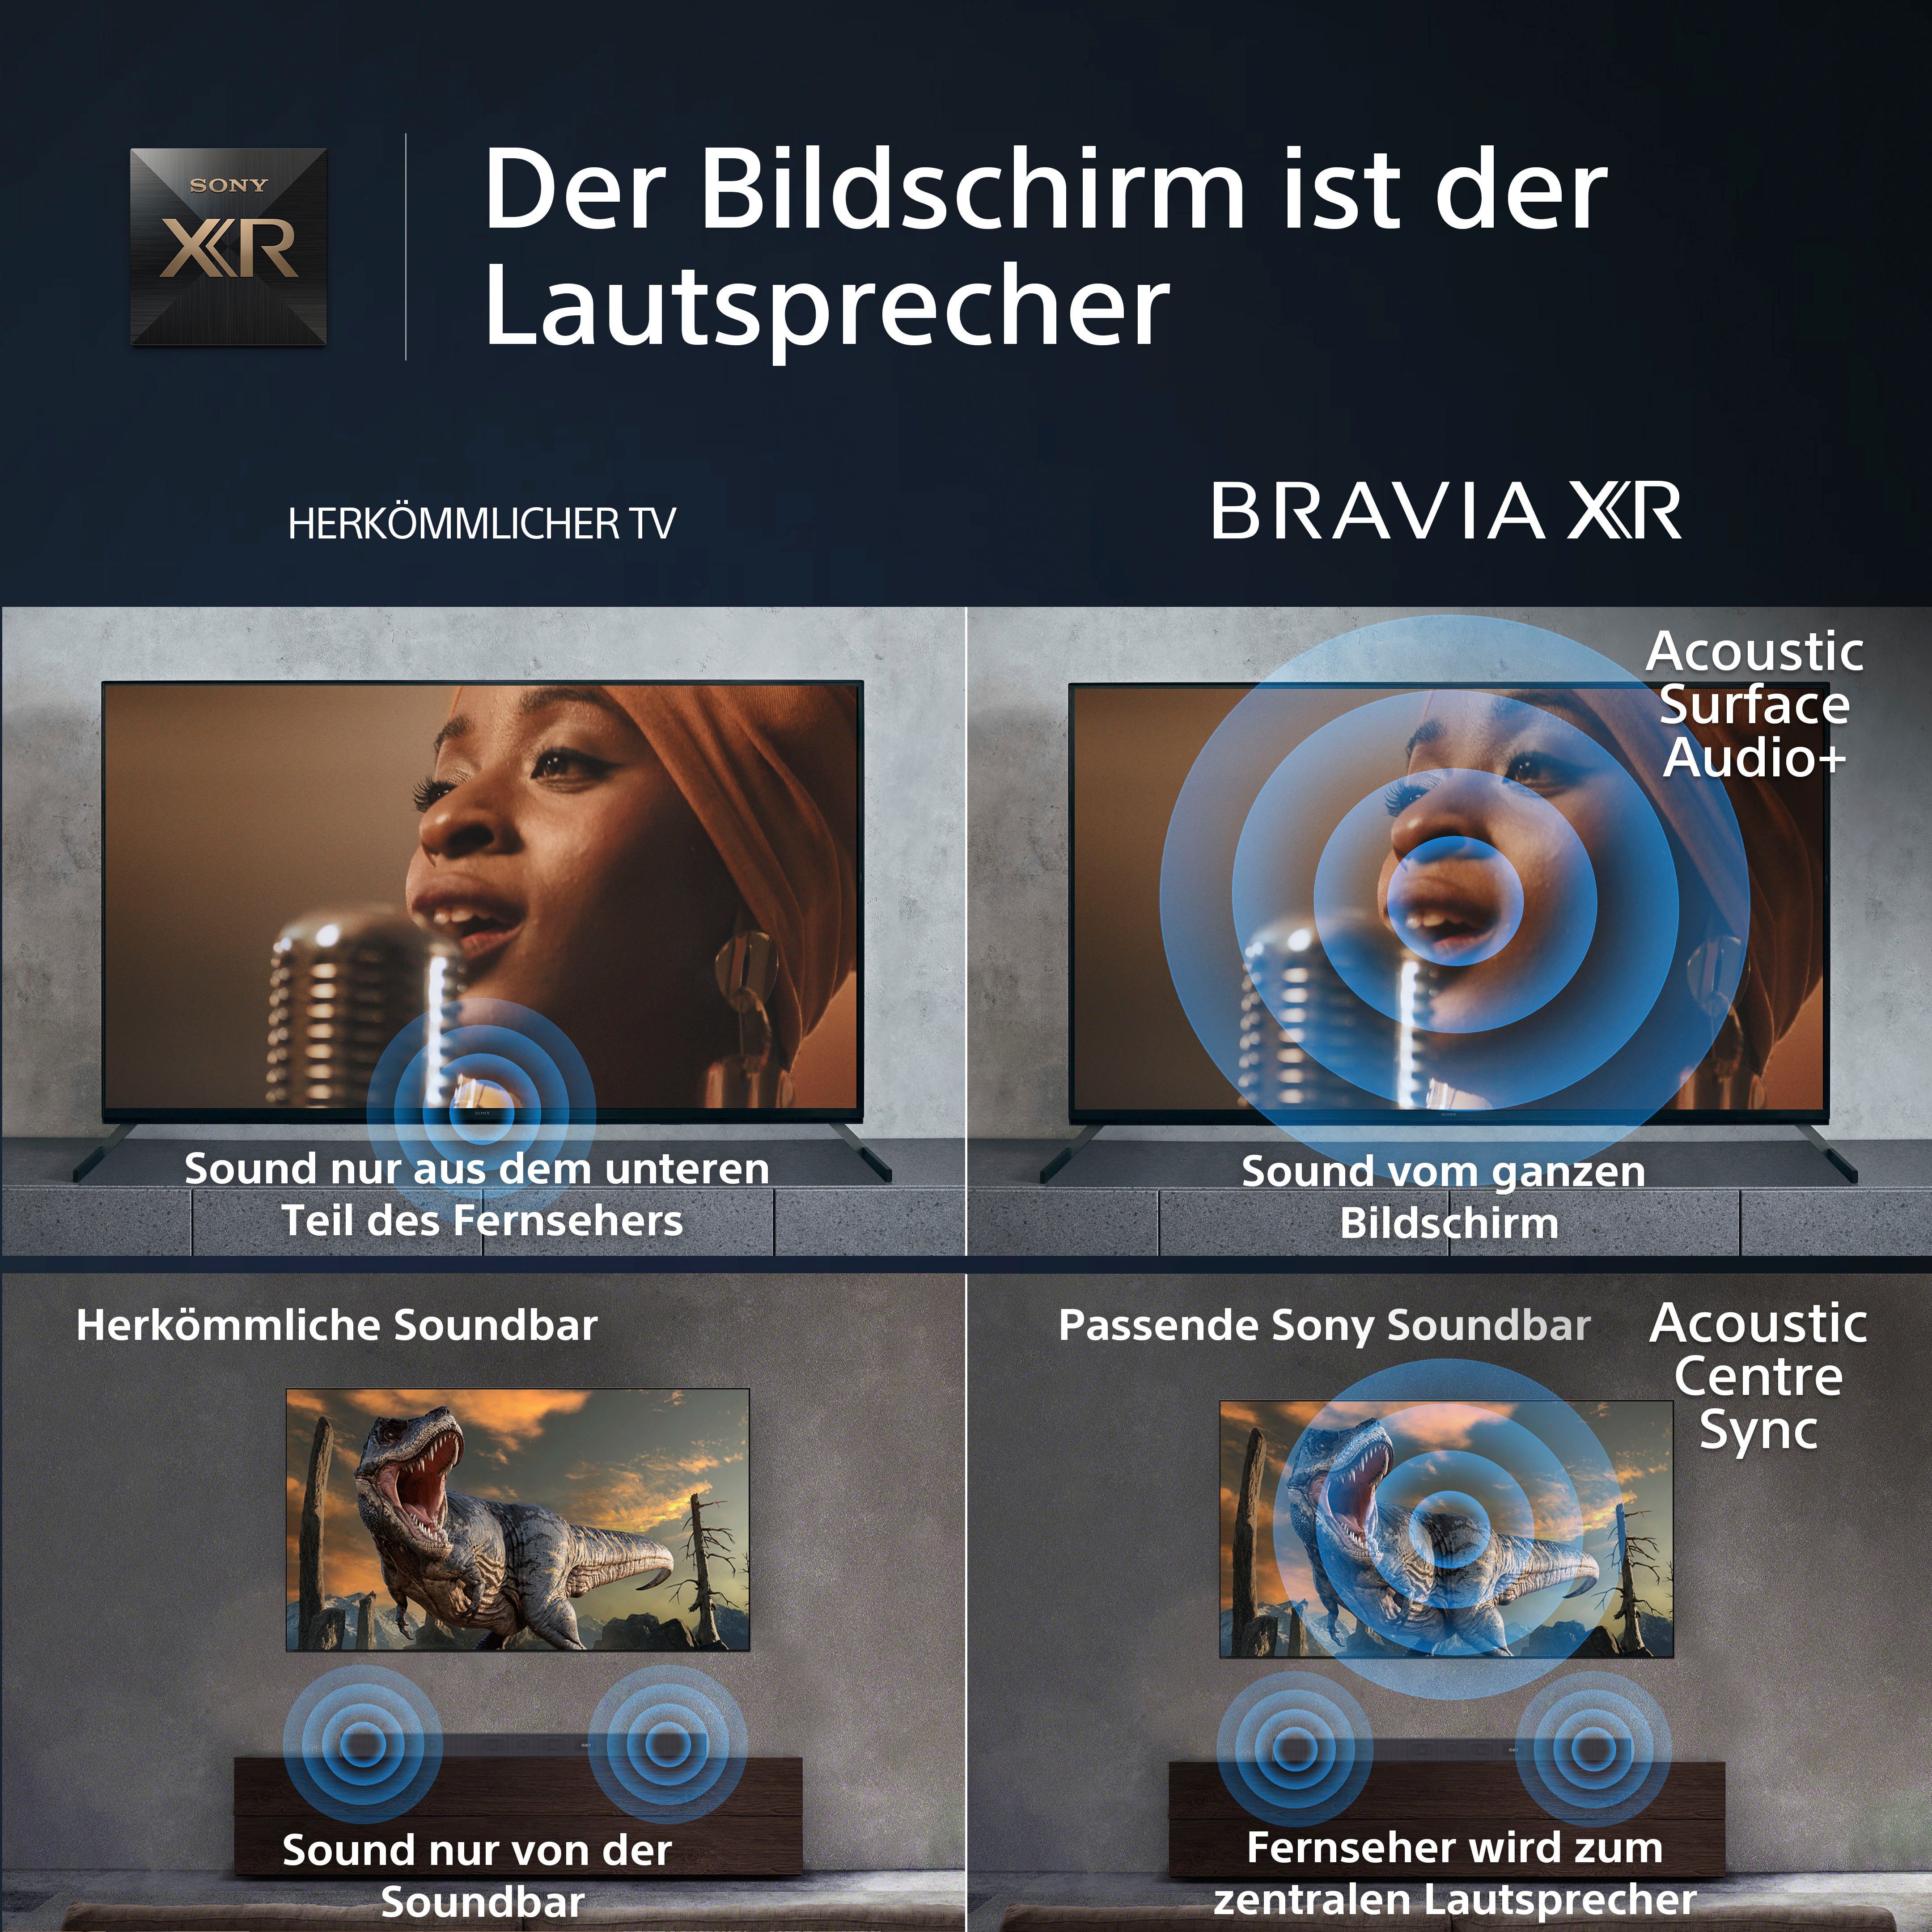 TRILUMINOS BRAVIA Google PS5-Features) Ultra PRO, XR-65A80L exklusiven Android TV, cm/65 4K Zoll, TV, CORE, Smart-TV, mit OLED-Fernseher HD, Sony Smart-TV, (164